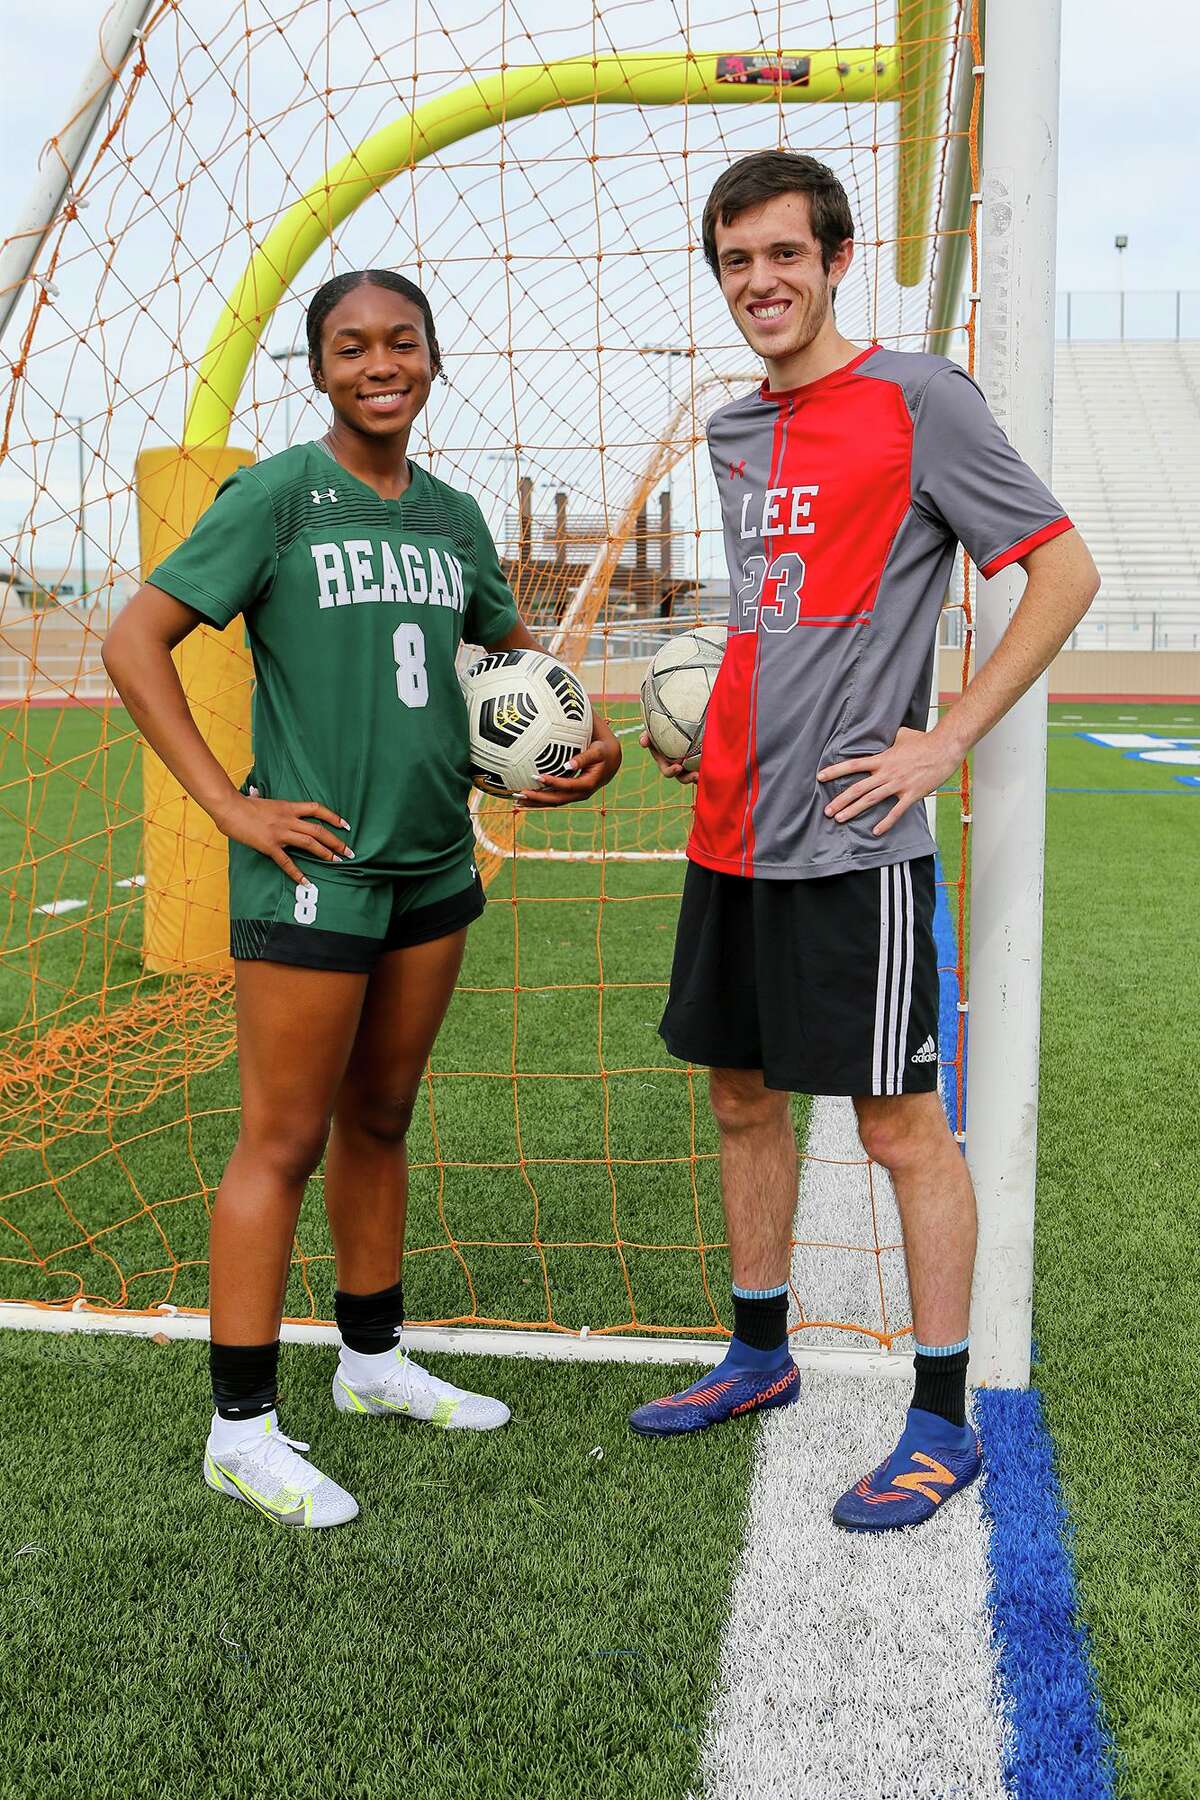 The Express-News' Girls Player of the Year, Reagan's Taylor Jernigan, and Boys Player of the year, LEE's Henry Bowland, at Comalander Stadium on Wednesday, May 19, 2021.